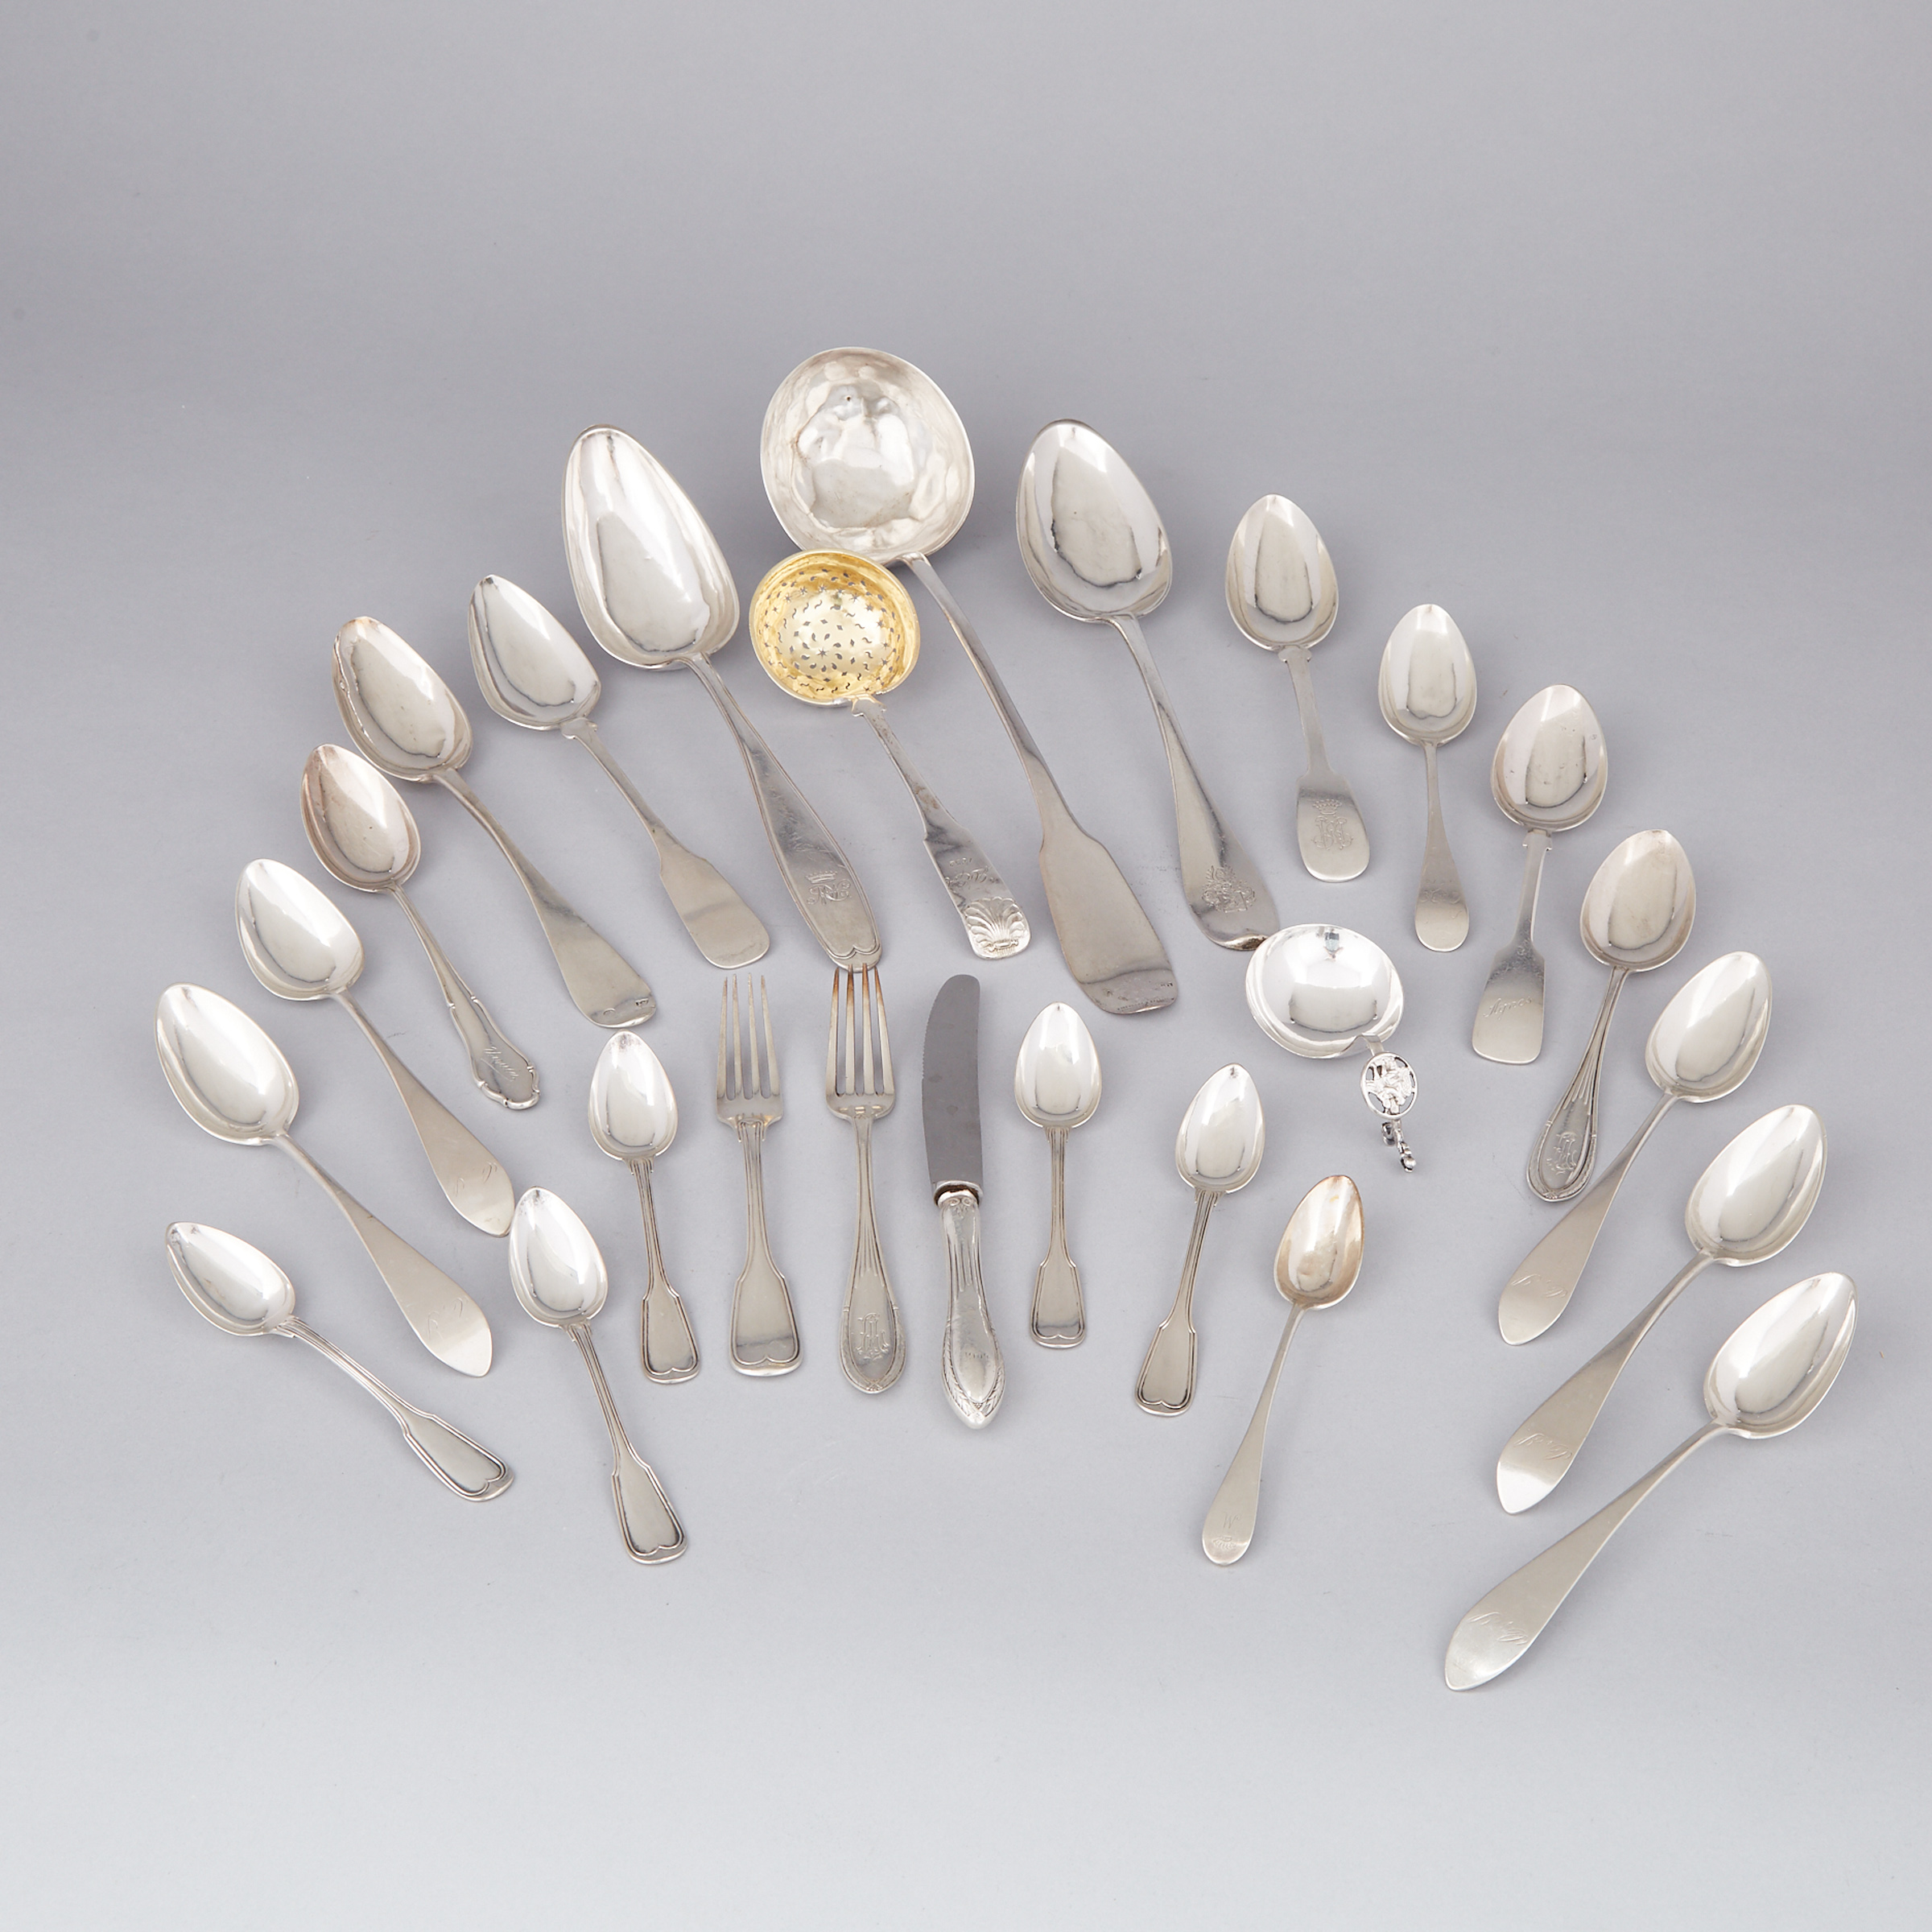 Group of Mainly German and other Continental Silver Flatware, 19th century